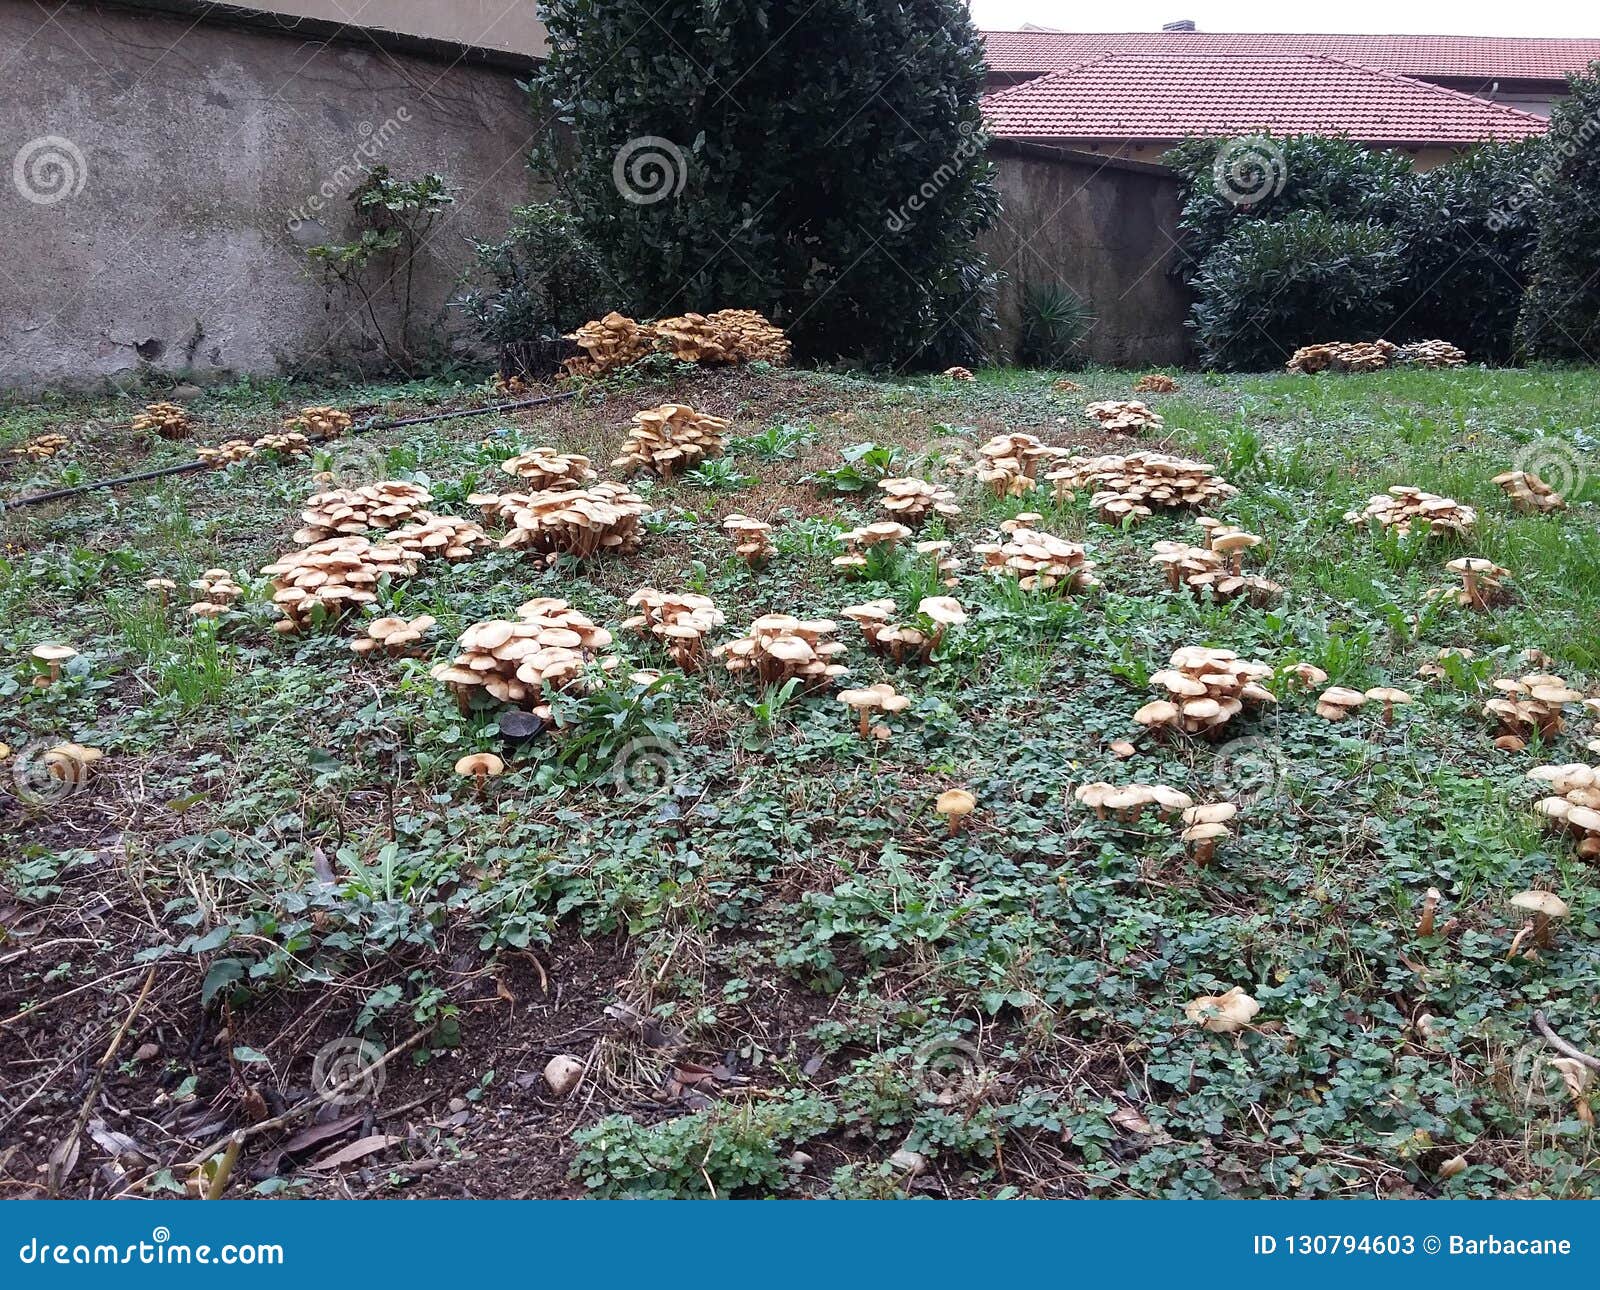 Mushrooms Grow In The Gardens In The City Stock Image Image Of